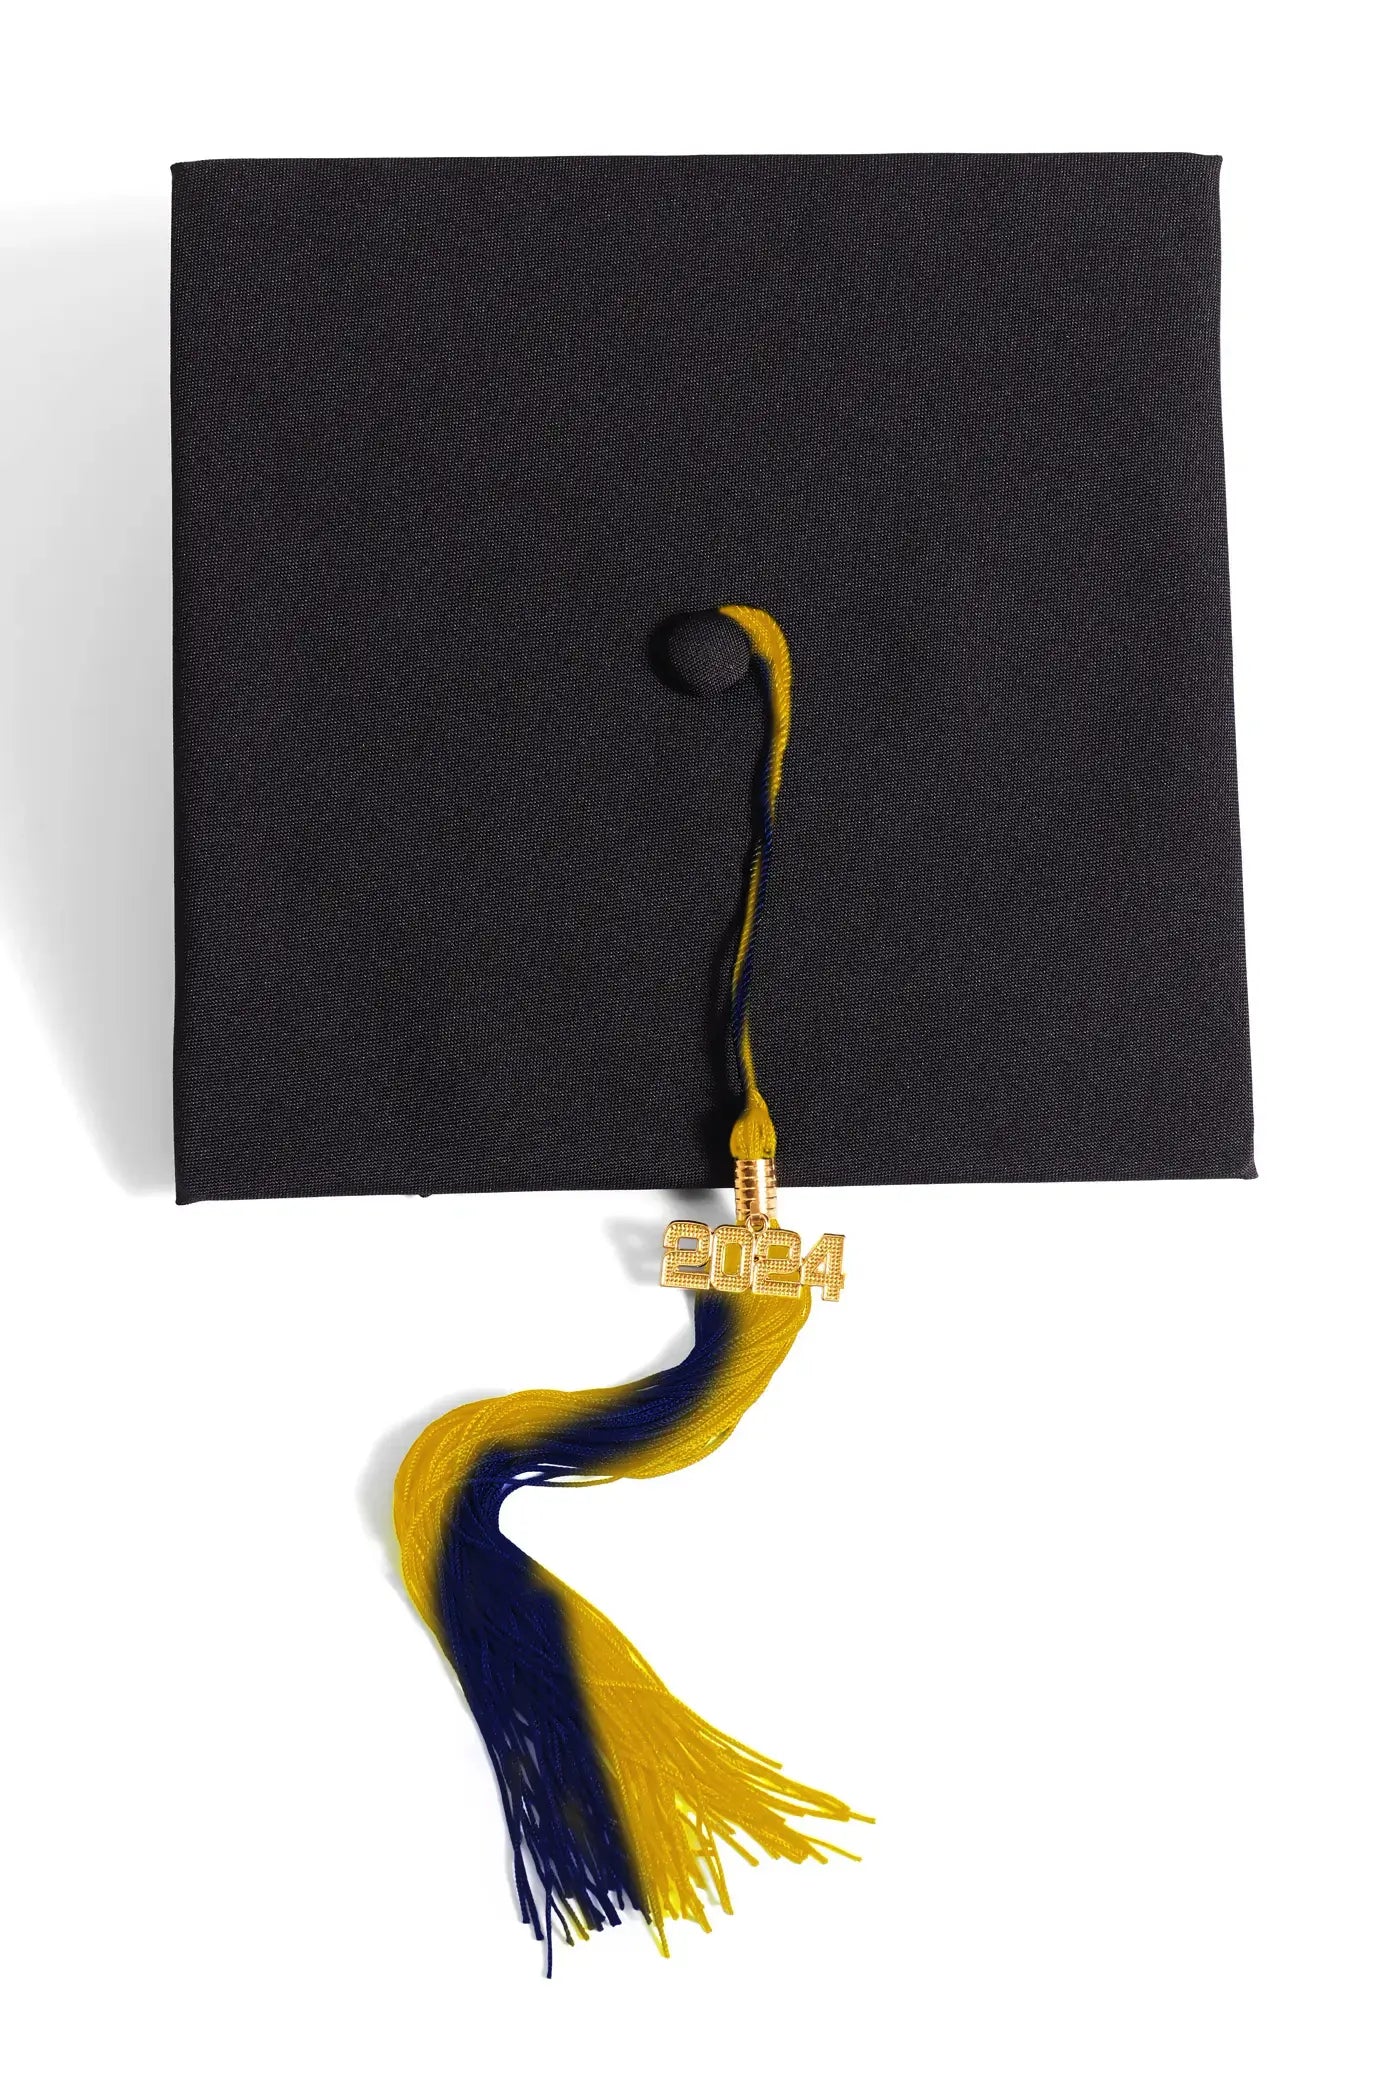 Bachelor's Degree Cap & Gown Set for UC Irvine